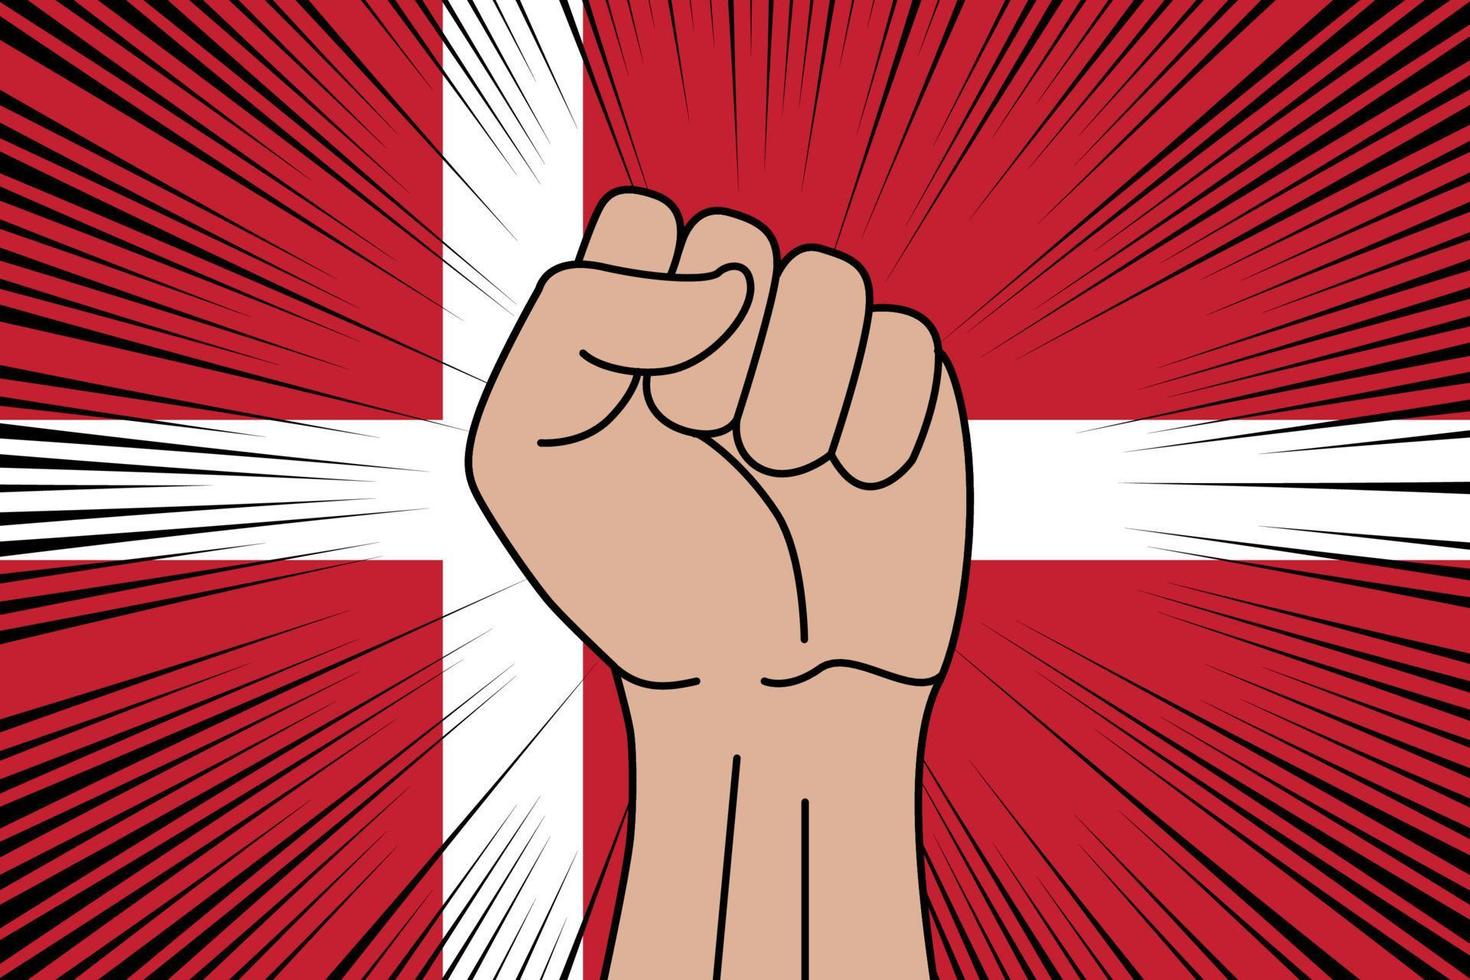 Human fist clenched symbol on flag of Denmark vector